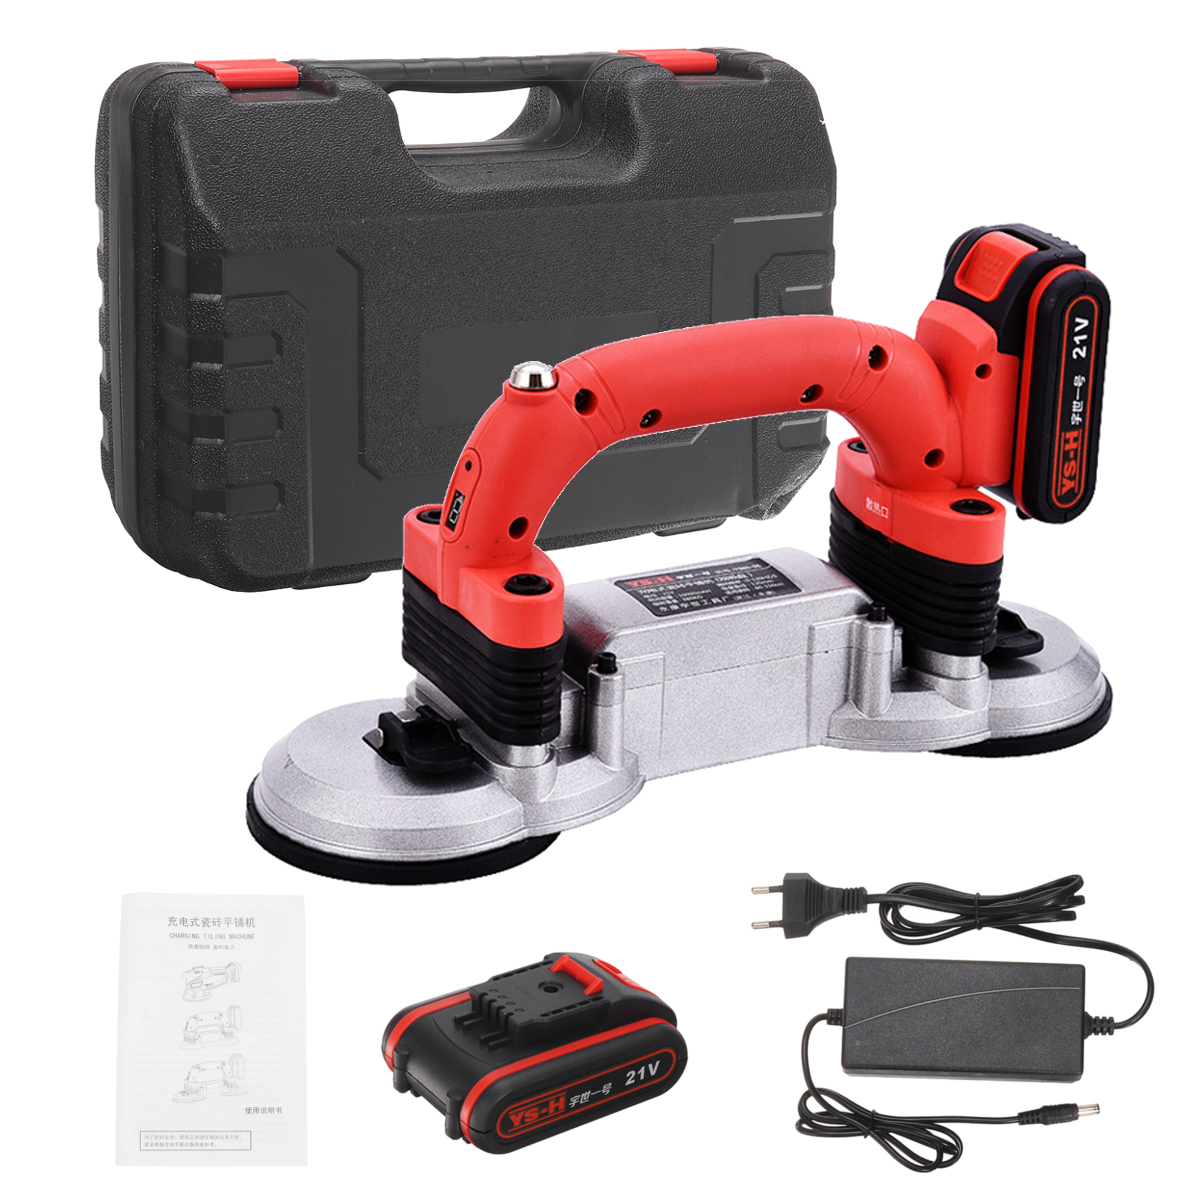 6-Speed-Tile-Tiling-Machine-Vibrator-Suction-Floor-Plaster-Laying-With-BatteryCase-1754739-13